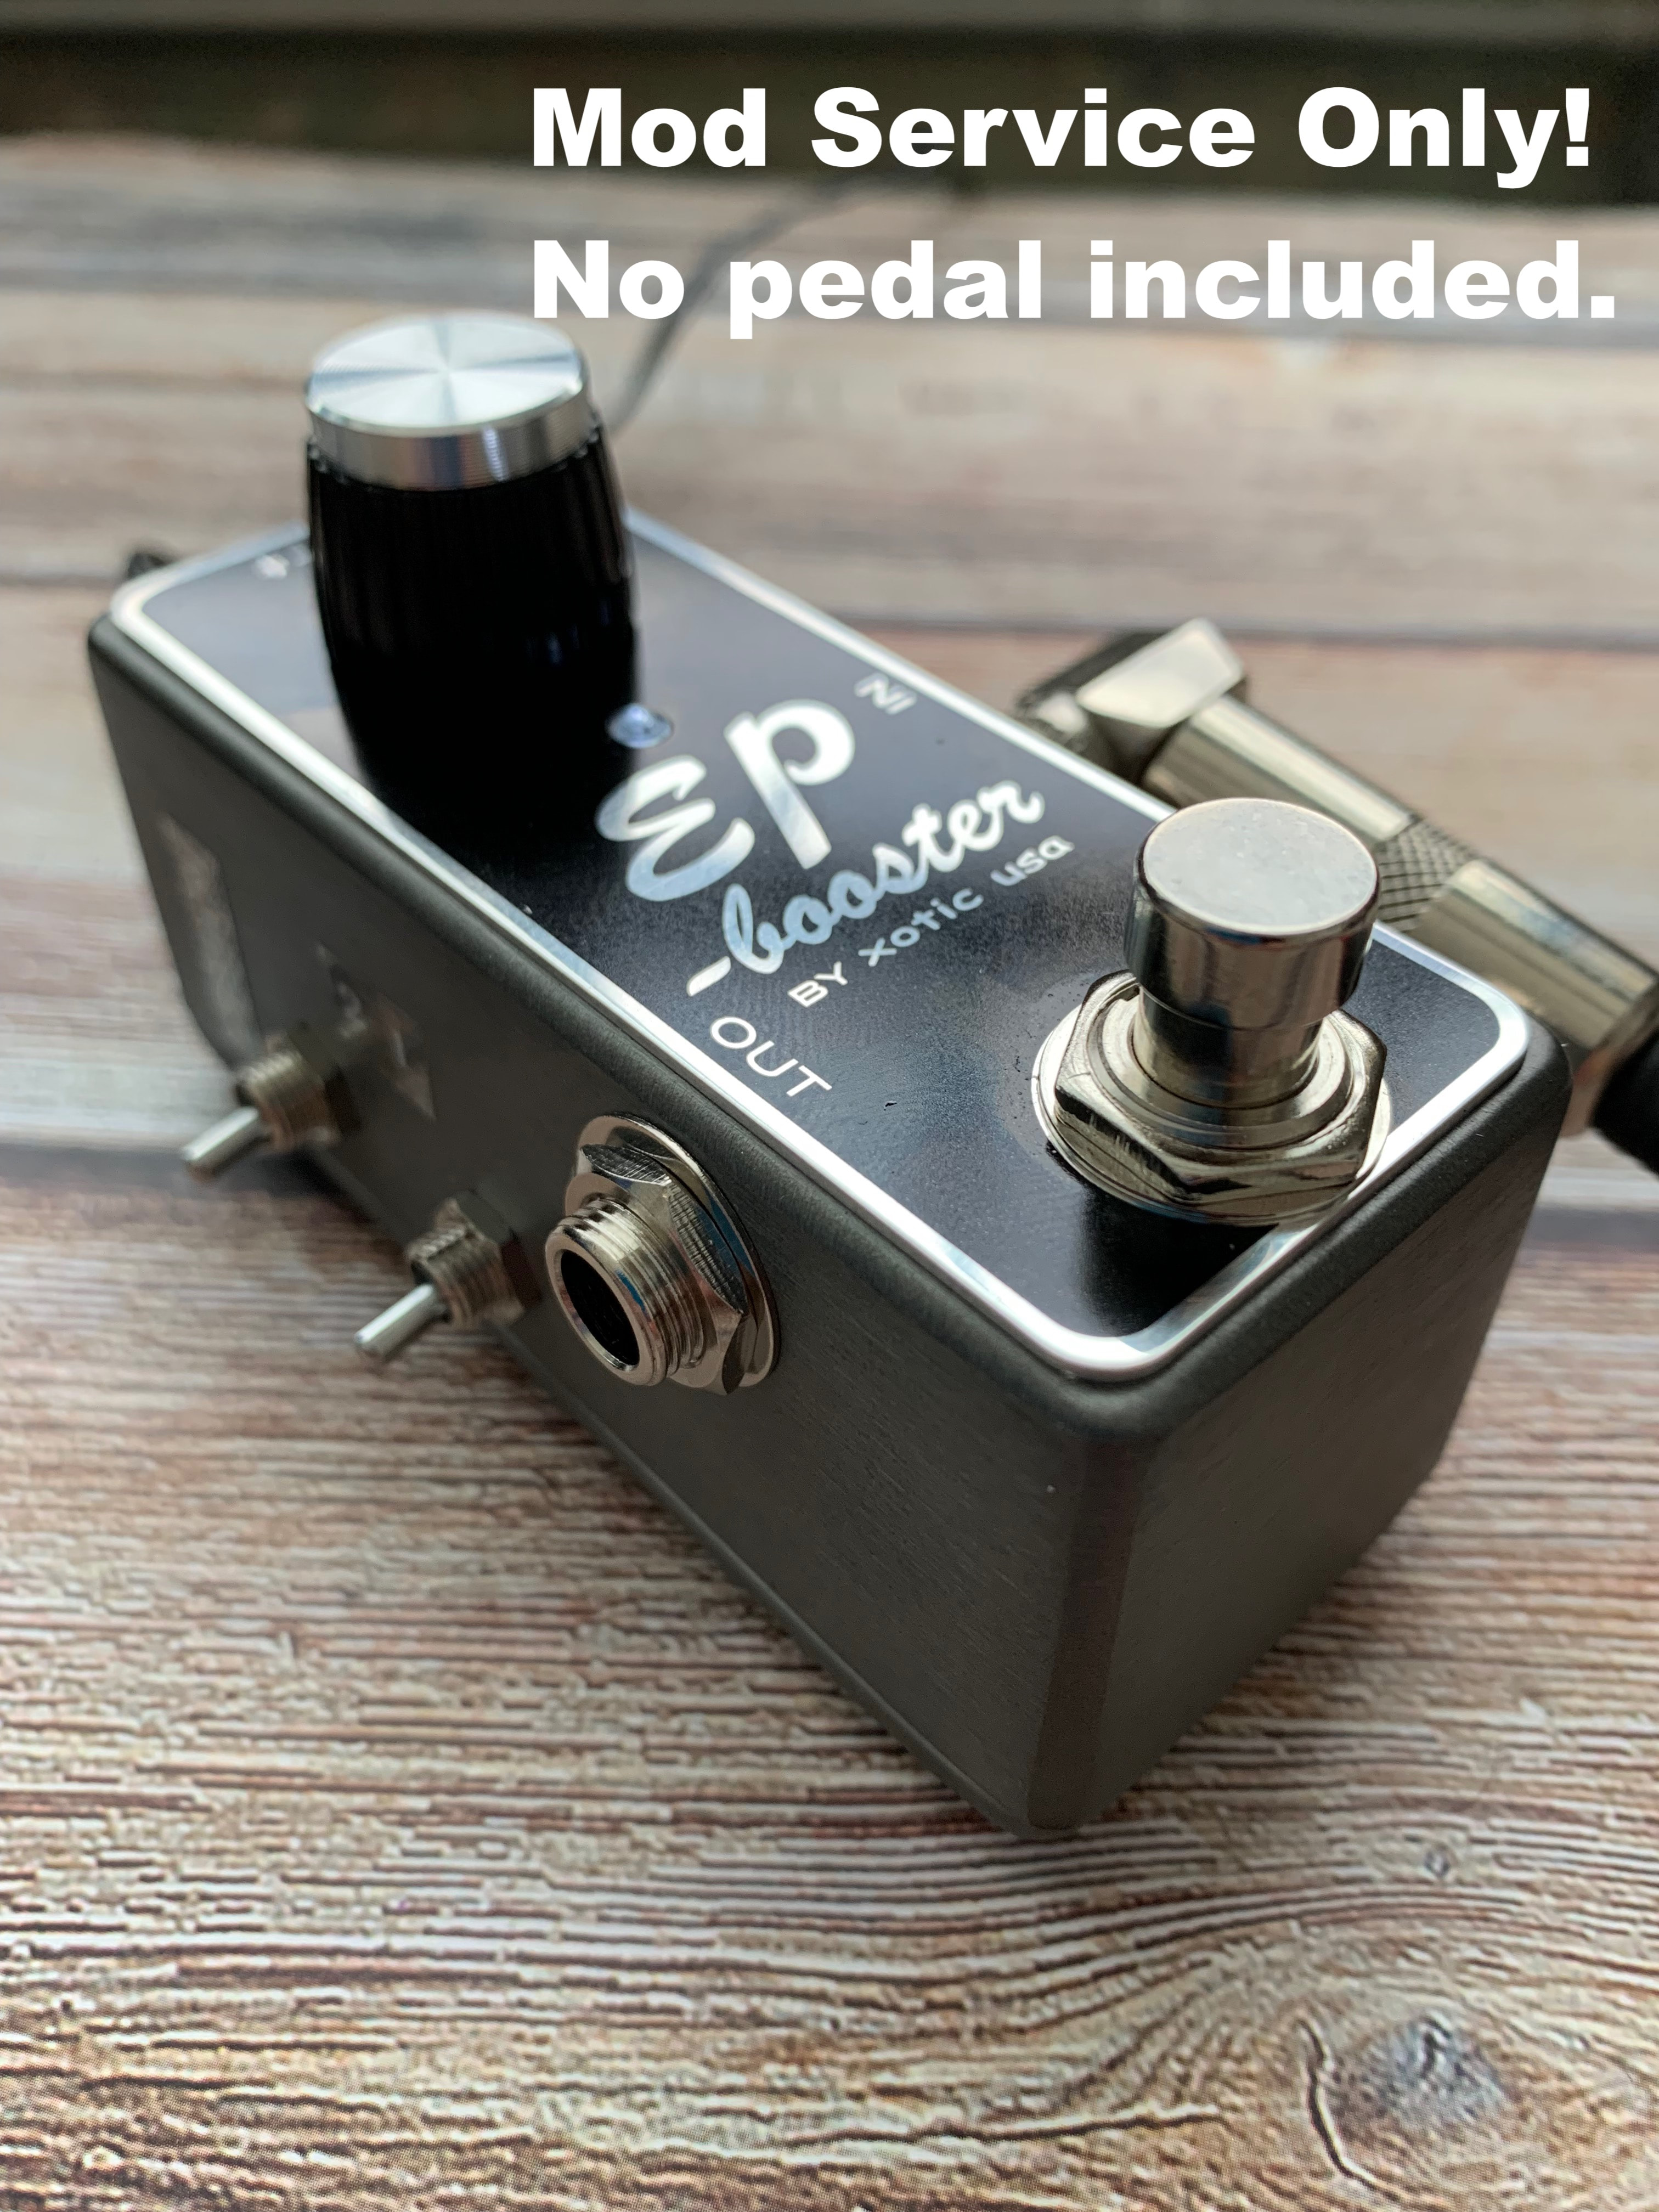 Modify and upgrade your Xotic EP Booster! Mod service Only!